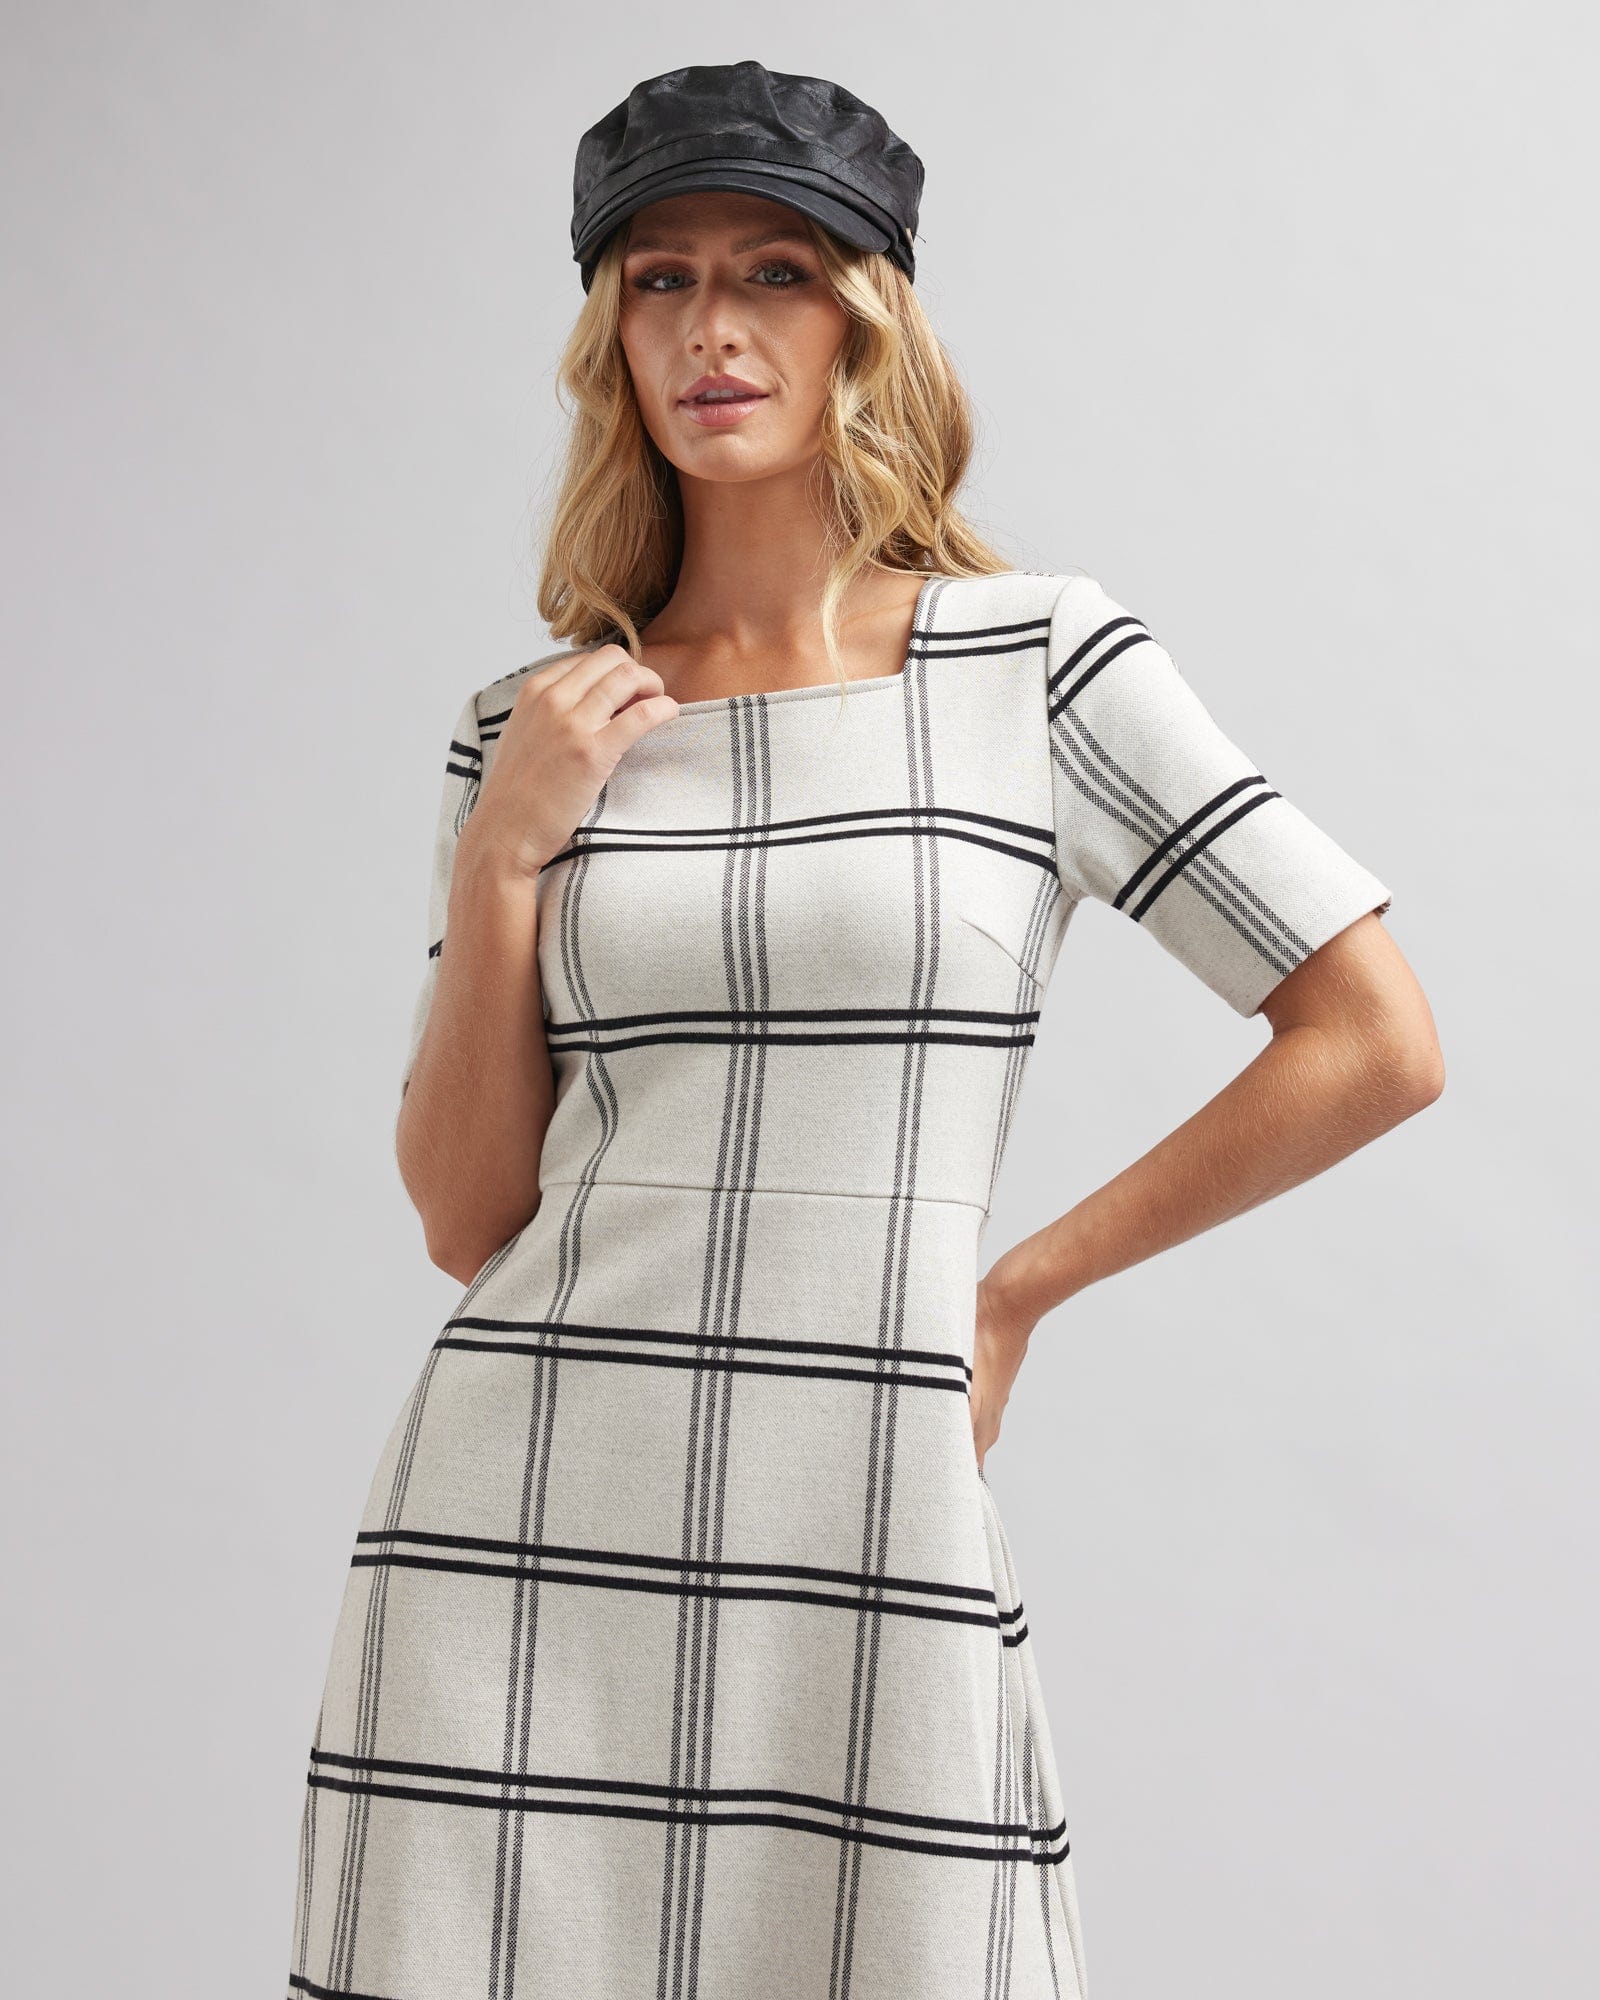 Woman in a half sleeved, knee-length, black and white plaid dress